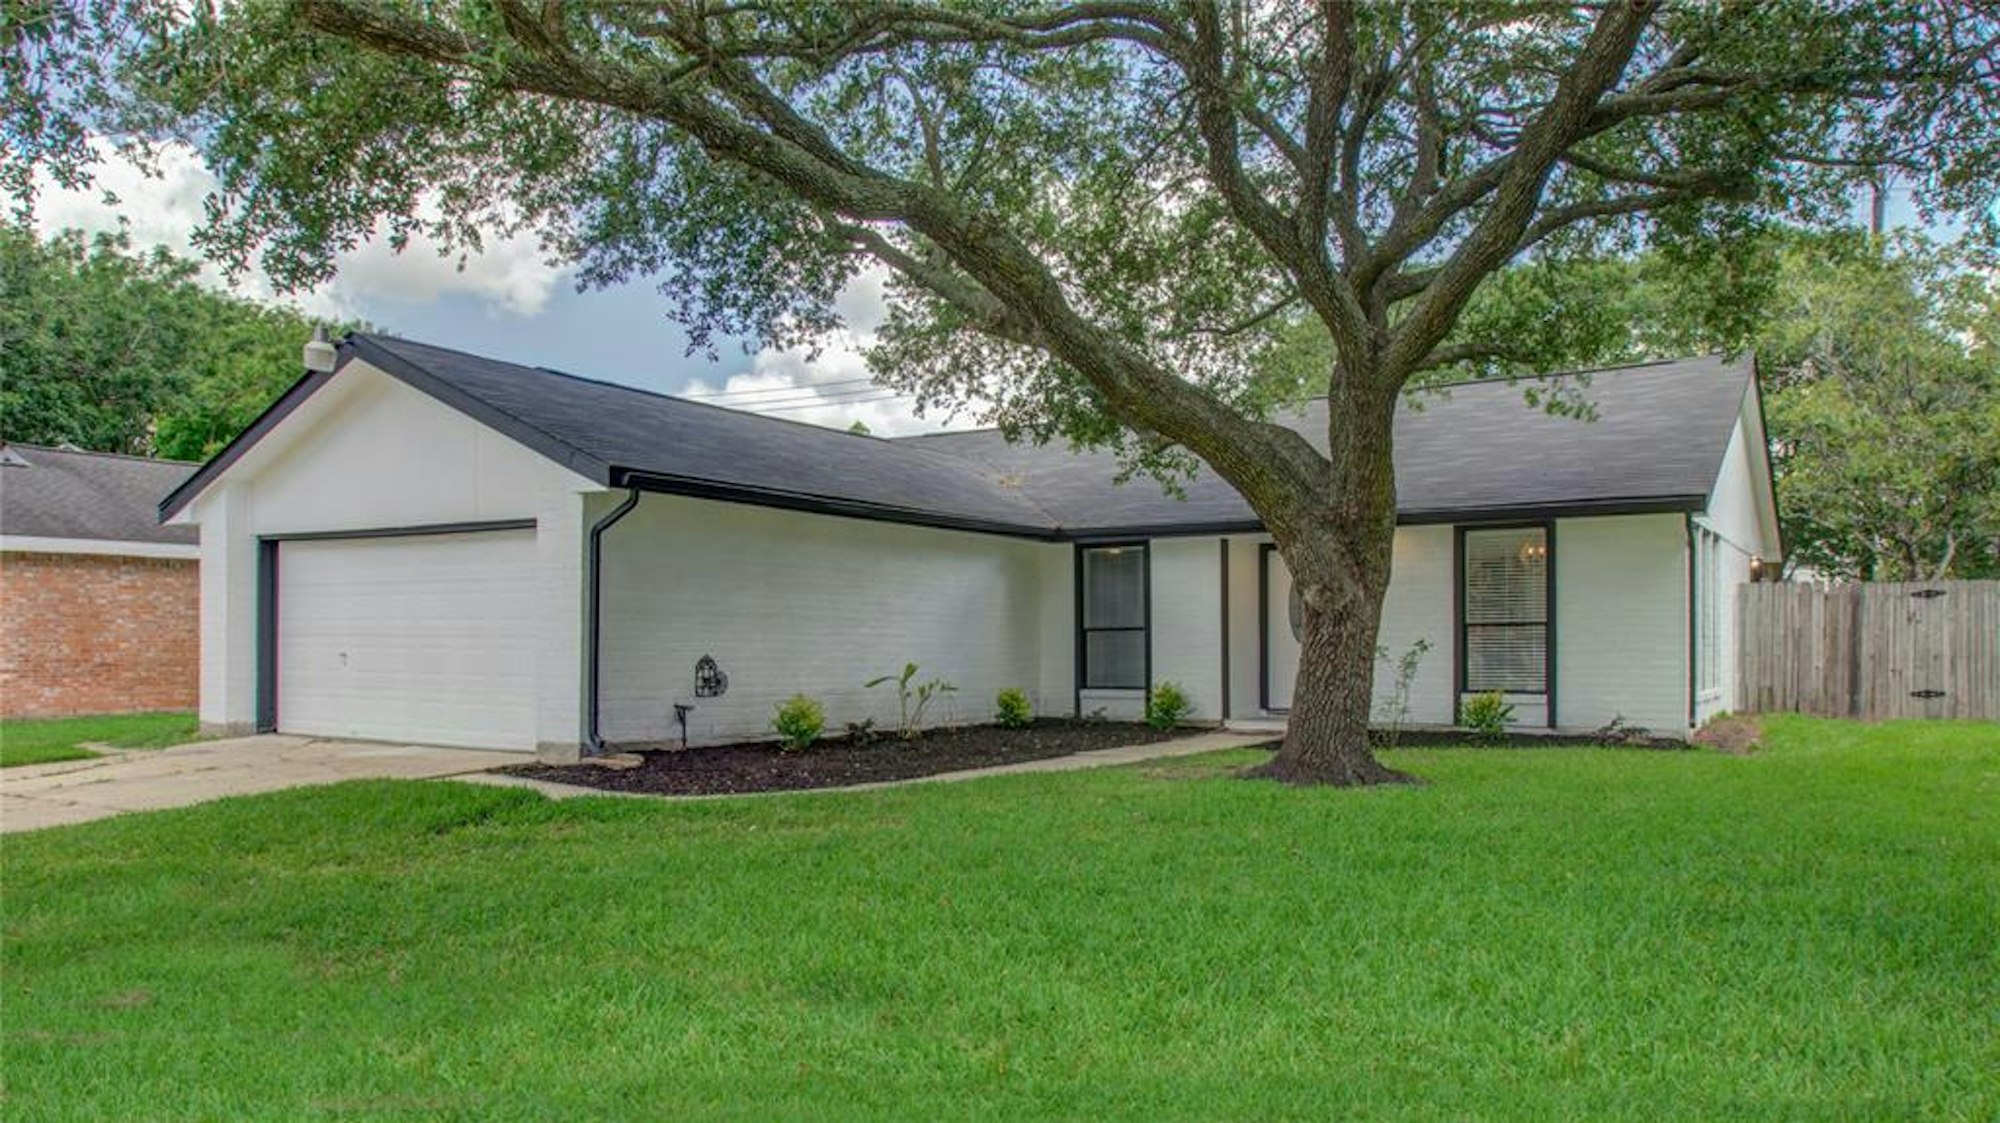 Photo 1 of 18 - 3101 Pilgrims Point Ln, Pearland, TX 77581